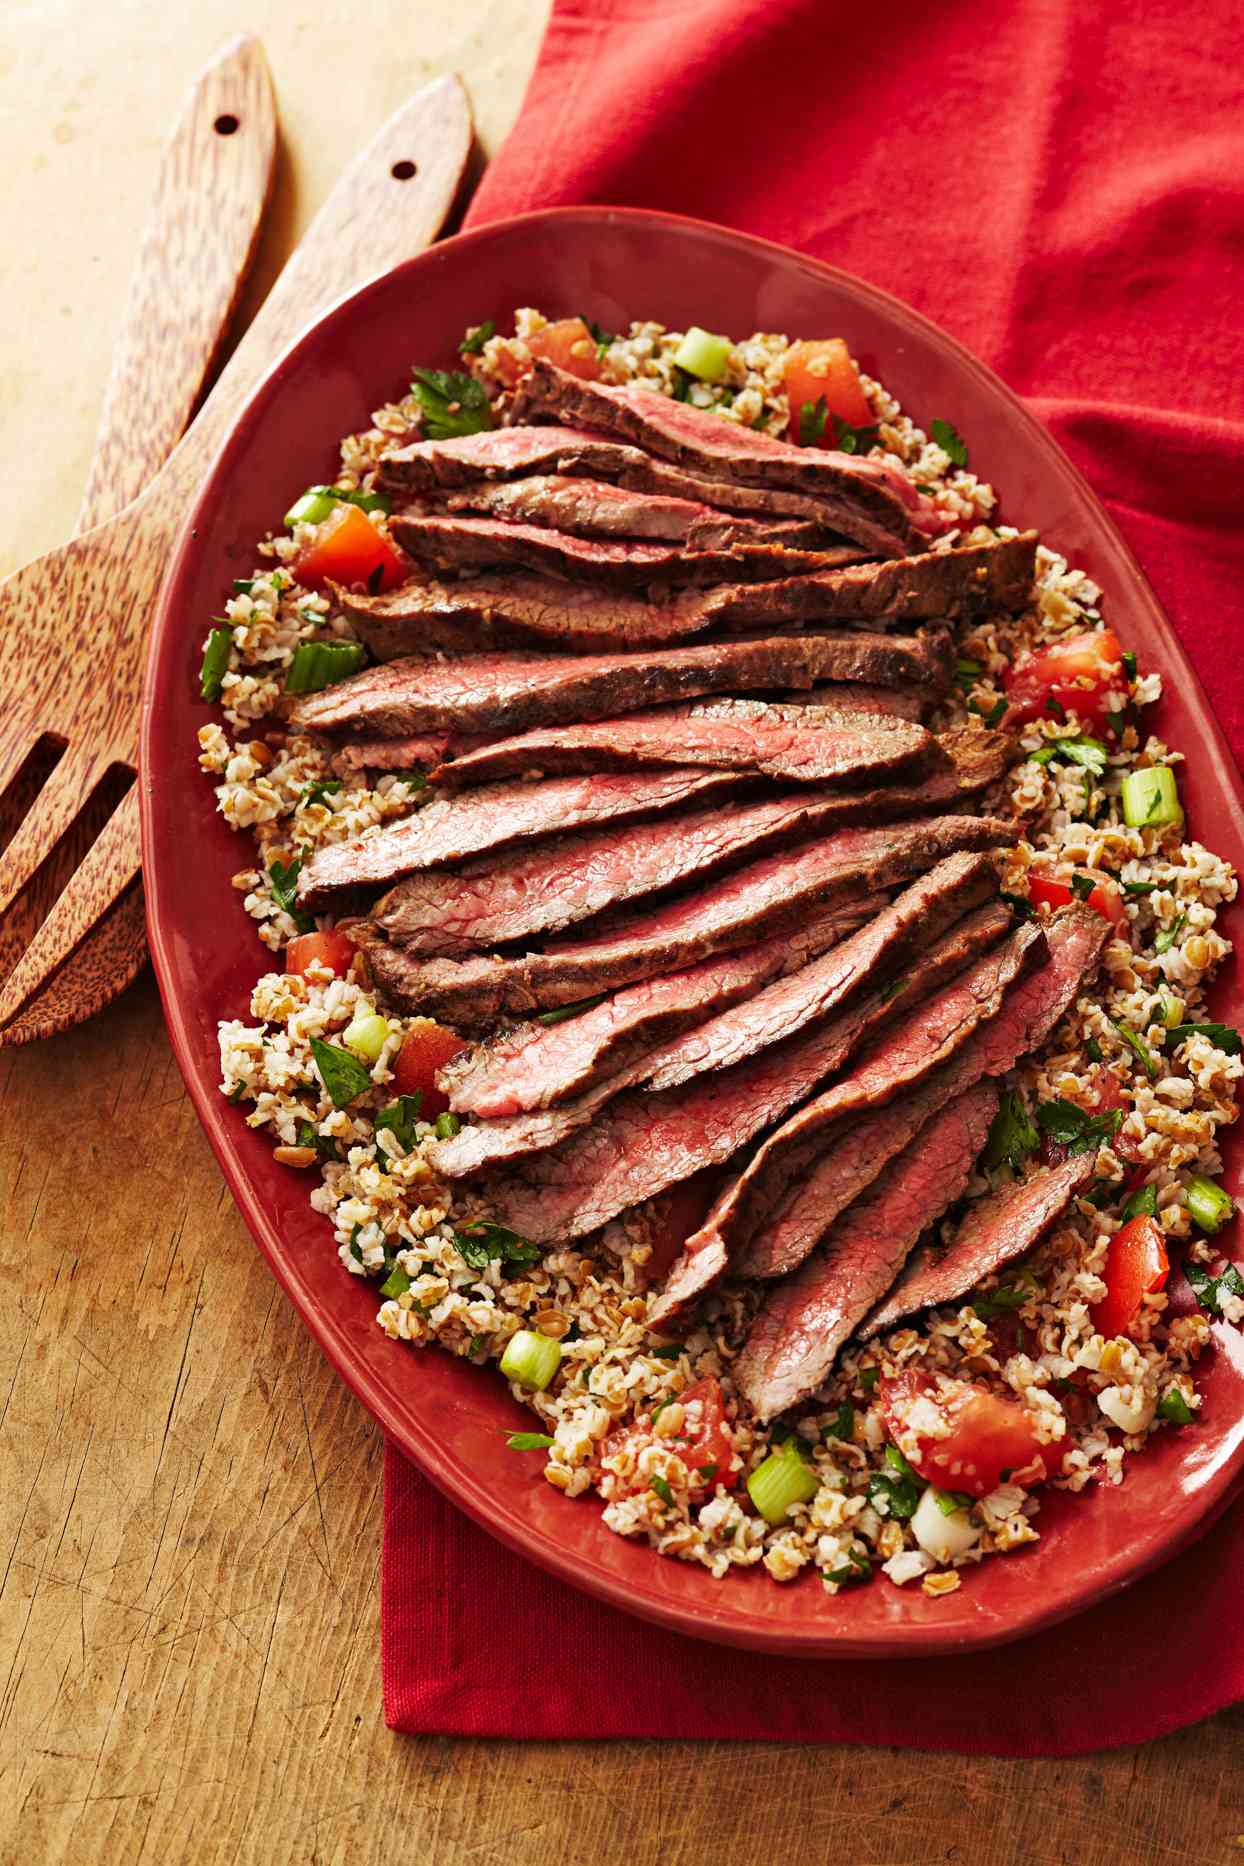 Lebanese Beef and Tabbouleh Salad